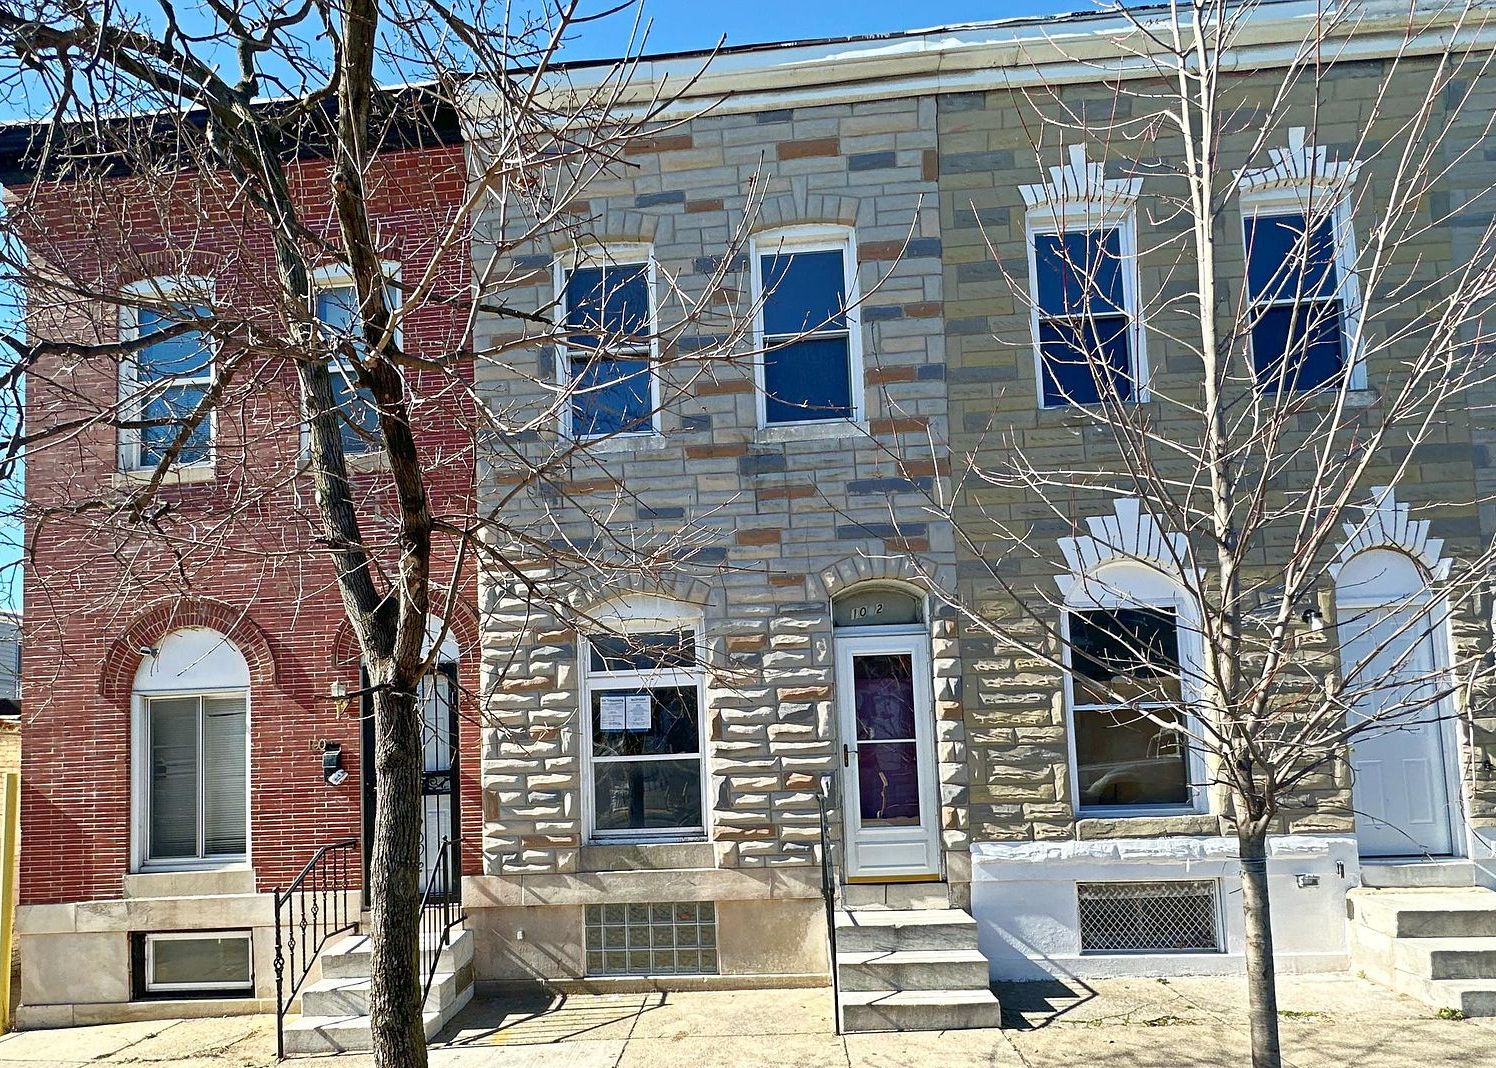 1002 Appleton St, Baltimore MD Foreclosure Property